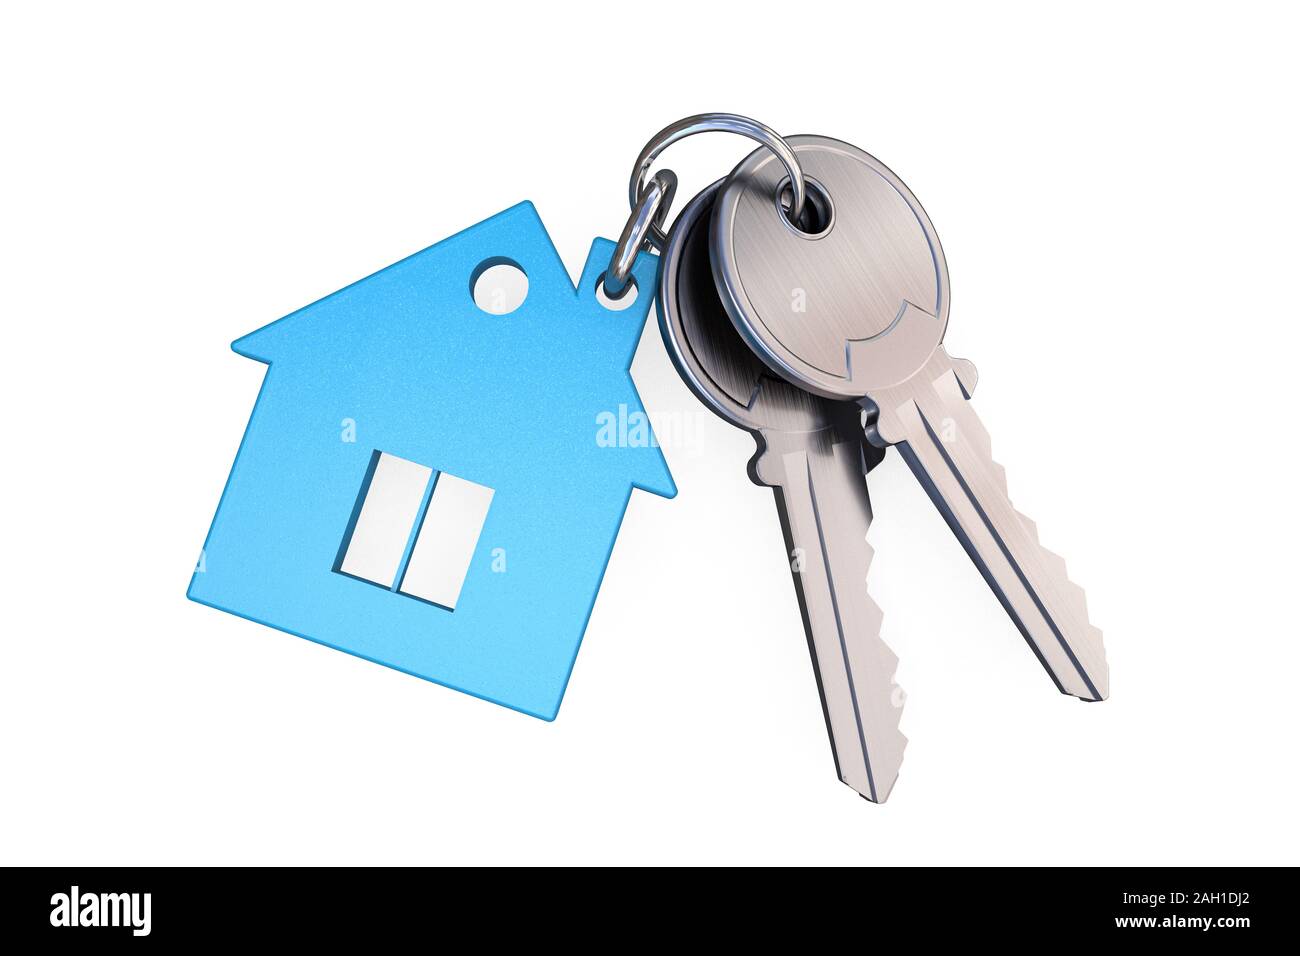 3D illustration: Blue transparent glass keychain in the form of a house with a pipe and a window connected by a ring with two metal keys. Stock Photo